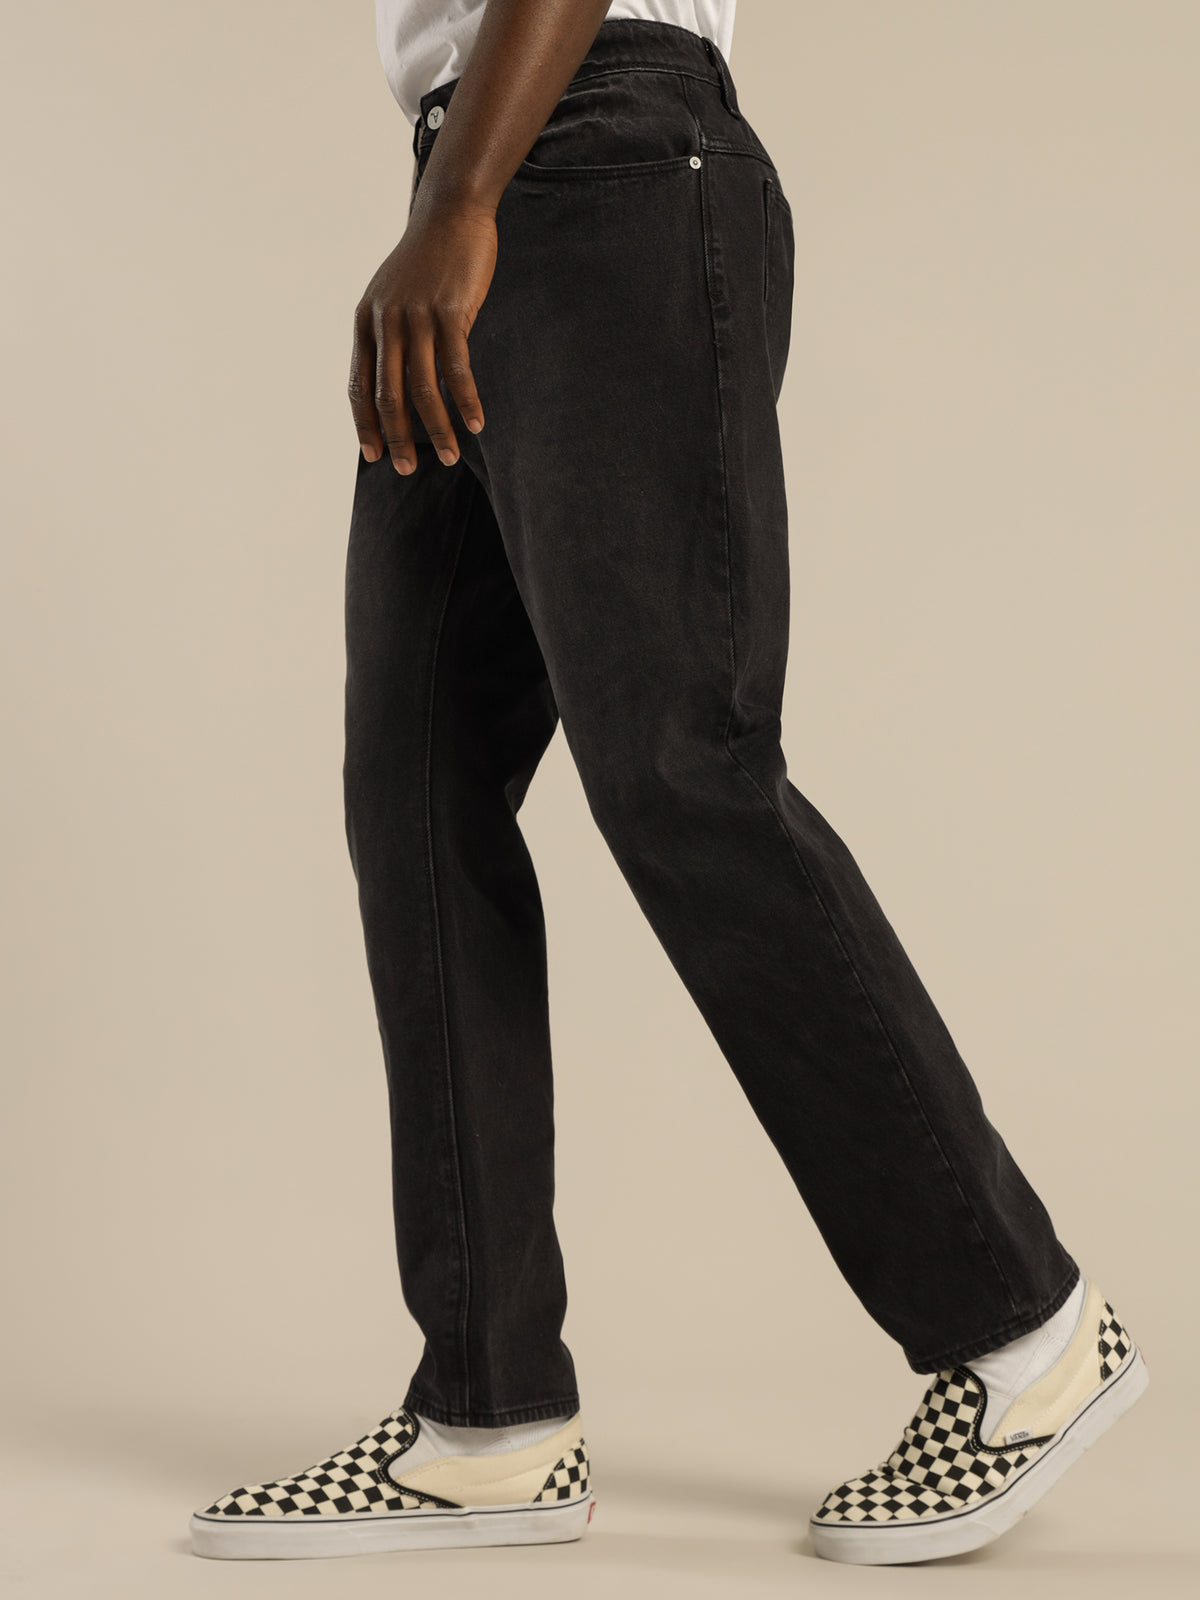 A Straight Nu Wave Jeans in Black